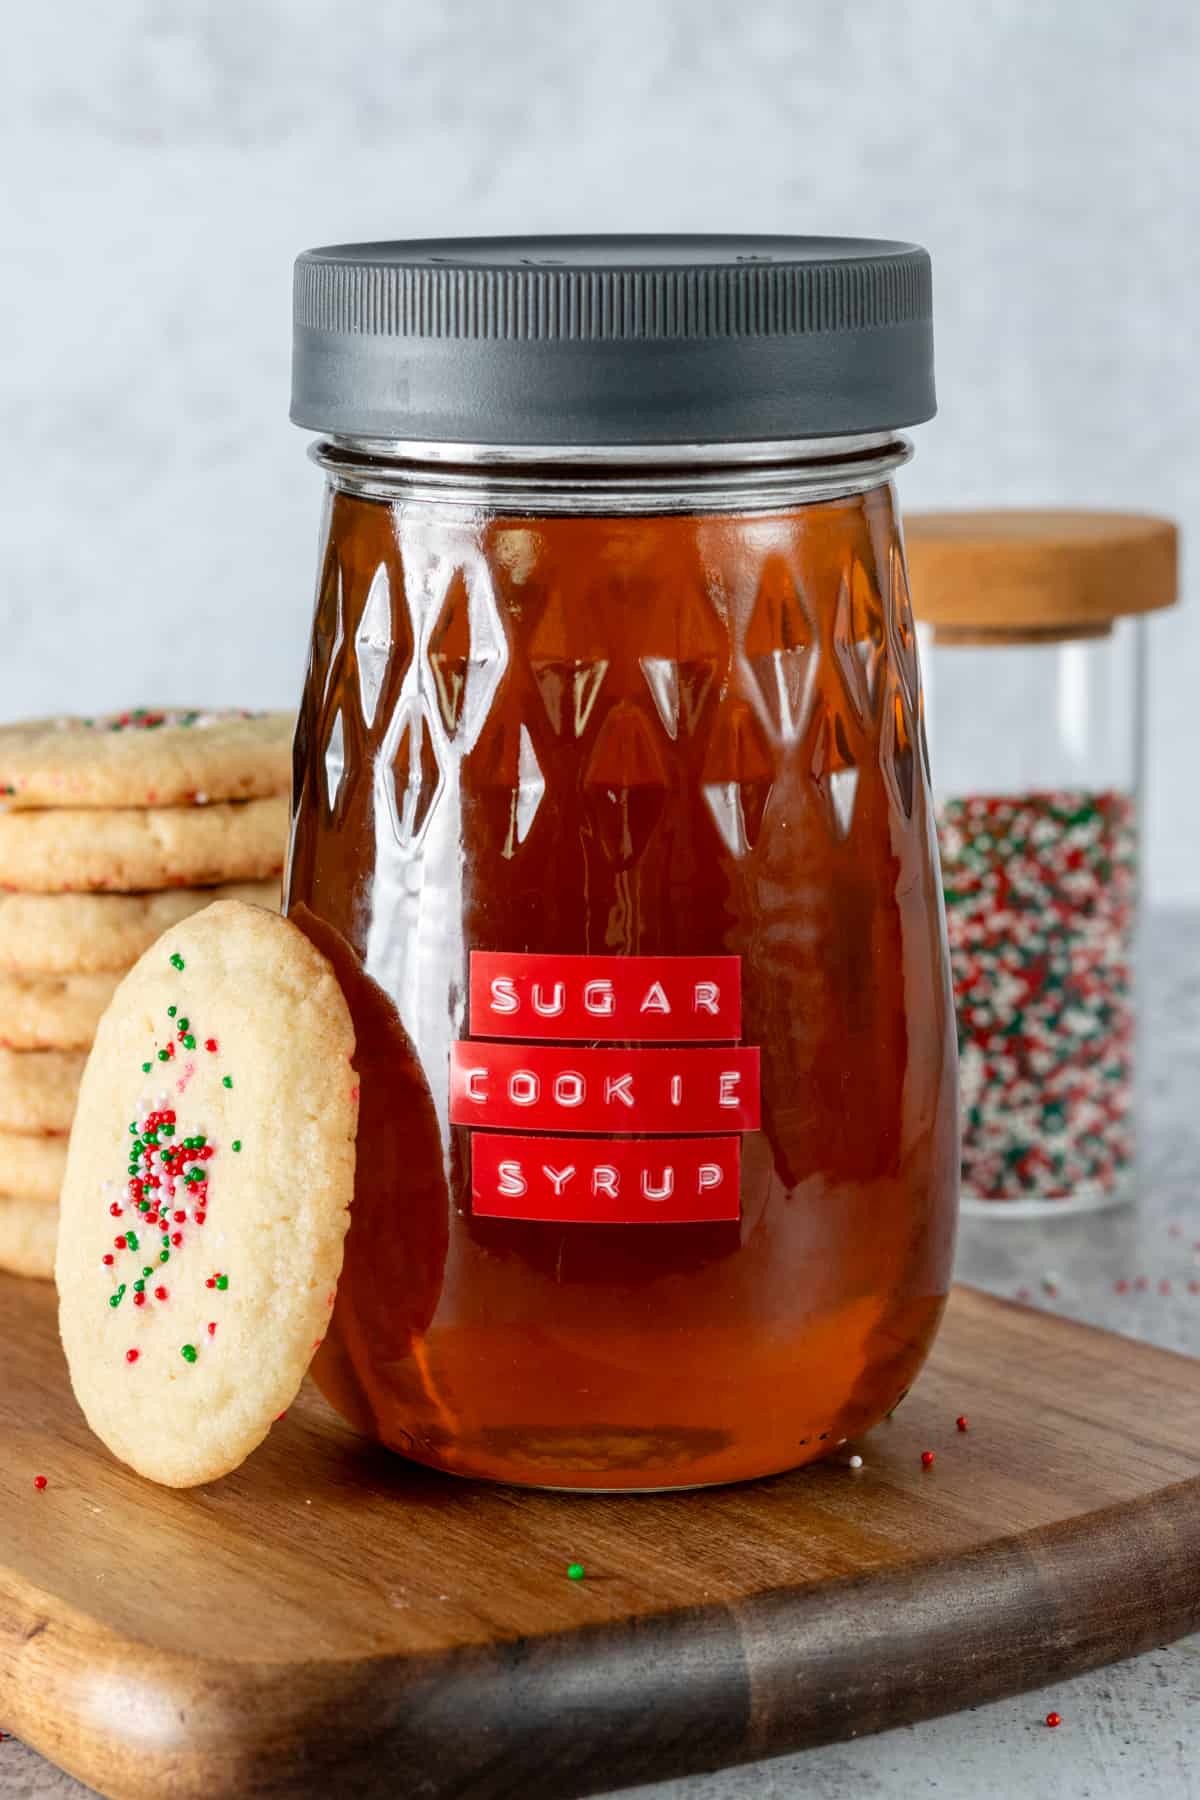 Homemade Starbucks Sugar Cookie Syrup for coffee.